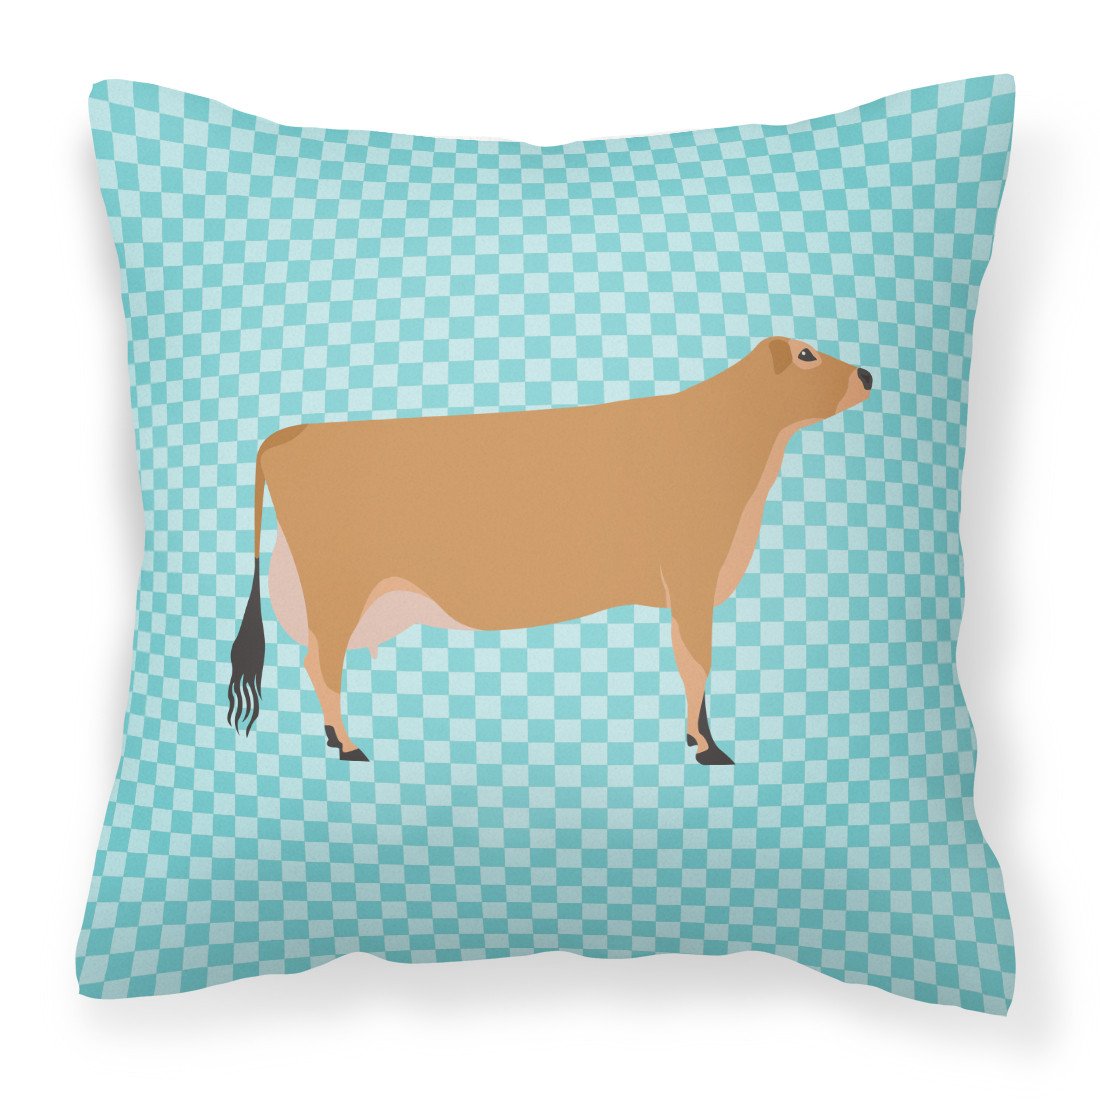 Jersey Cow Blue Check Fabric Decorative Pillow BB8003PW1818 by Caroline's Treasures